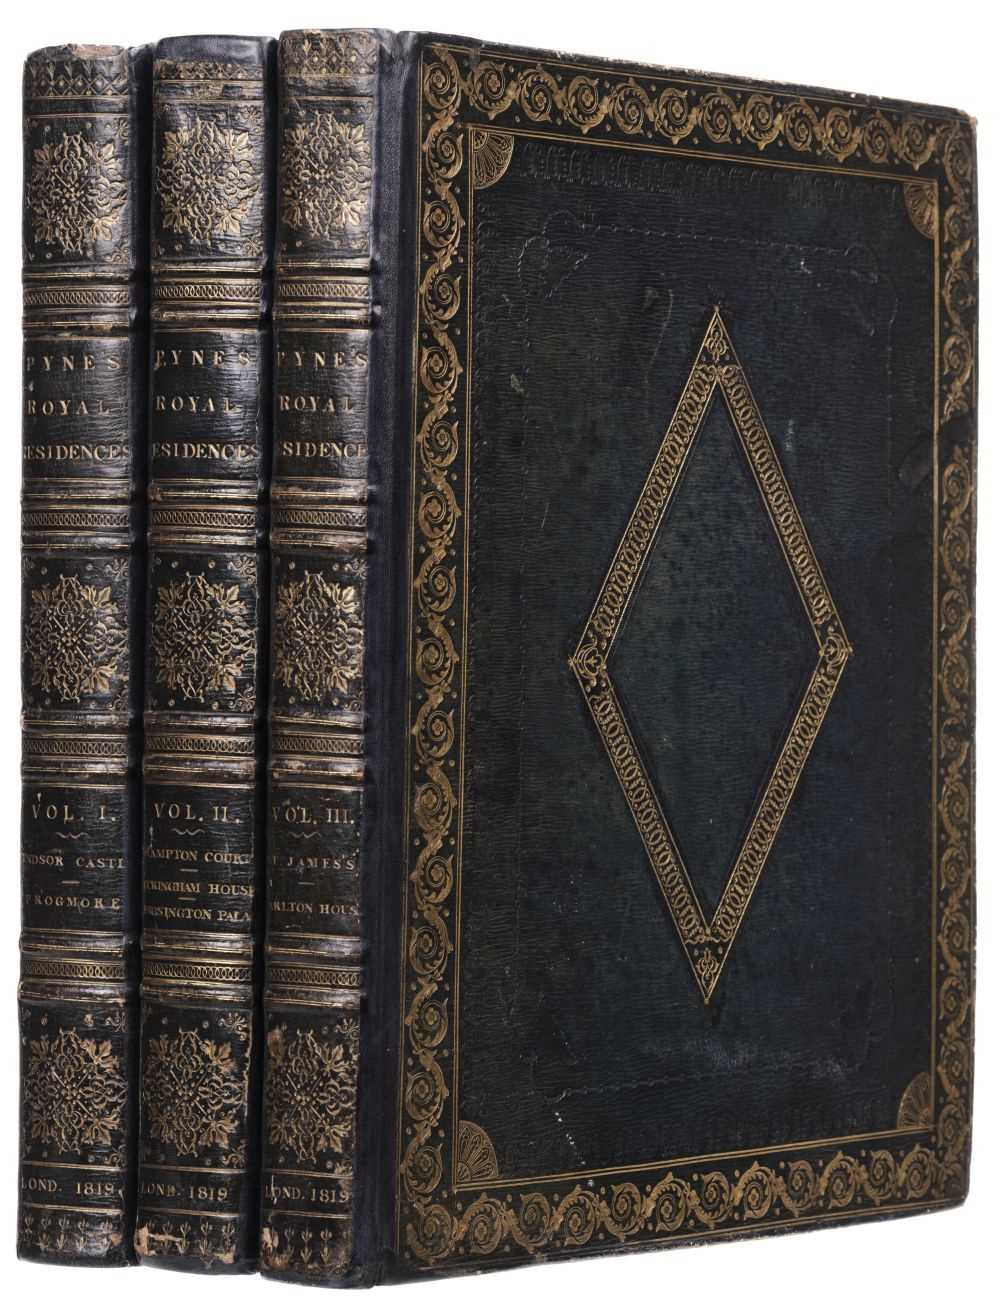 Lot 54 - Pyne (William Henry). The History of the Royal Residences, 3 volumes, London: A. Dry, 1819